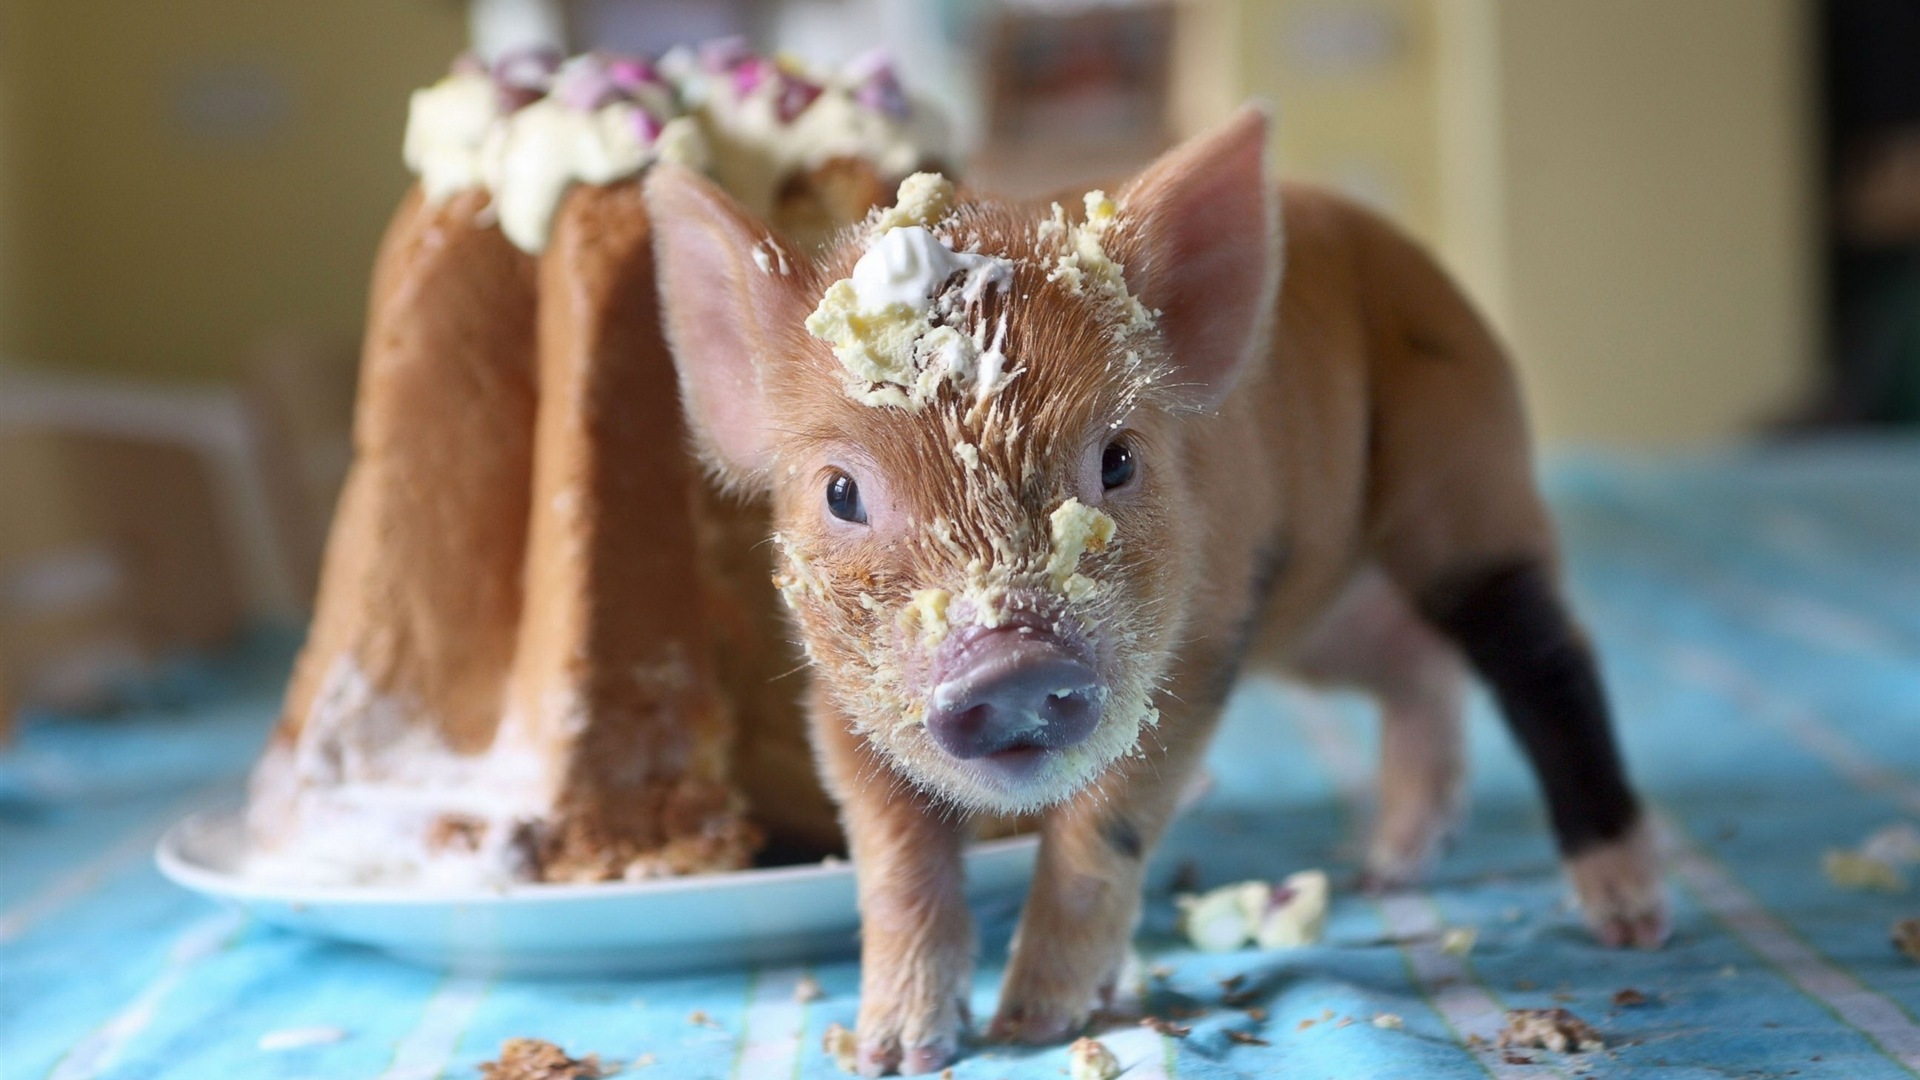 Pig Year about pigs HD wallpapers #6 - 1920x1080